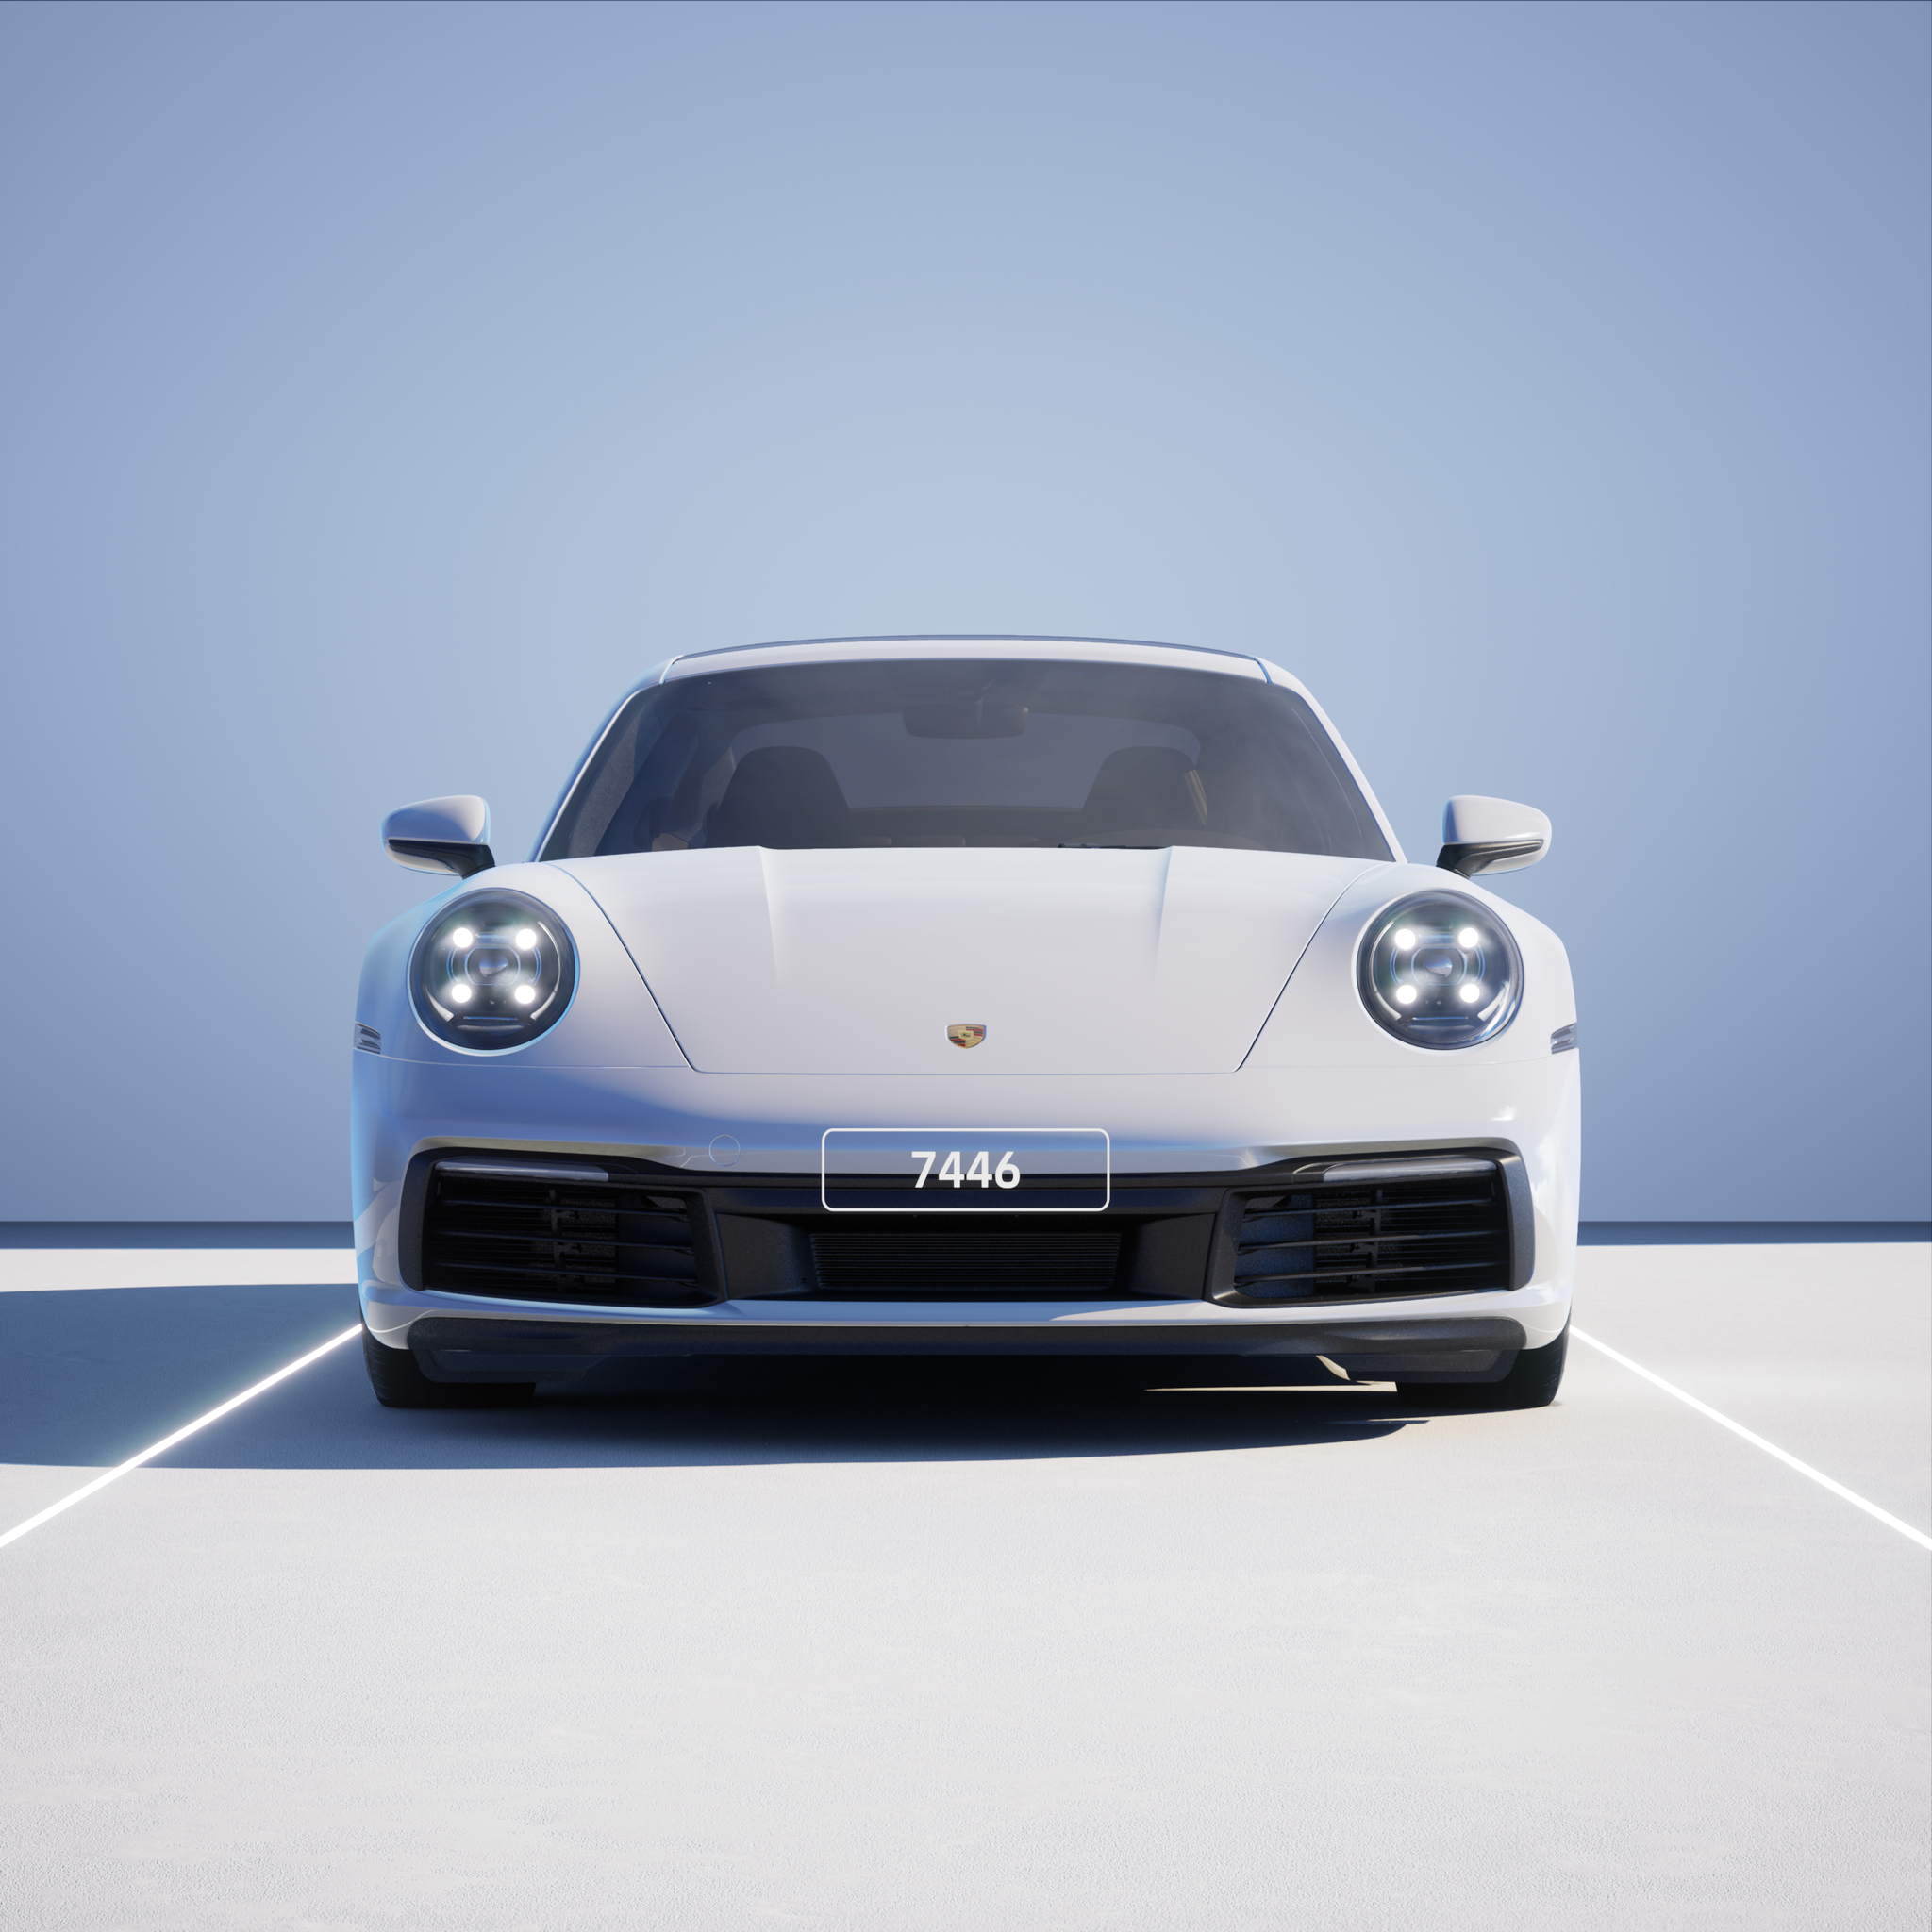 The PORSCHΞ 911 7446 image in phase